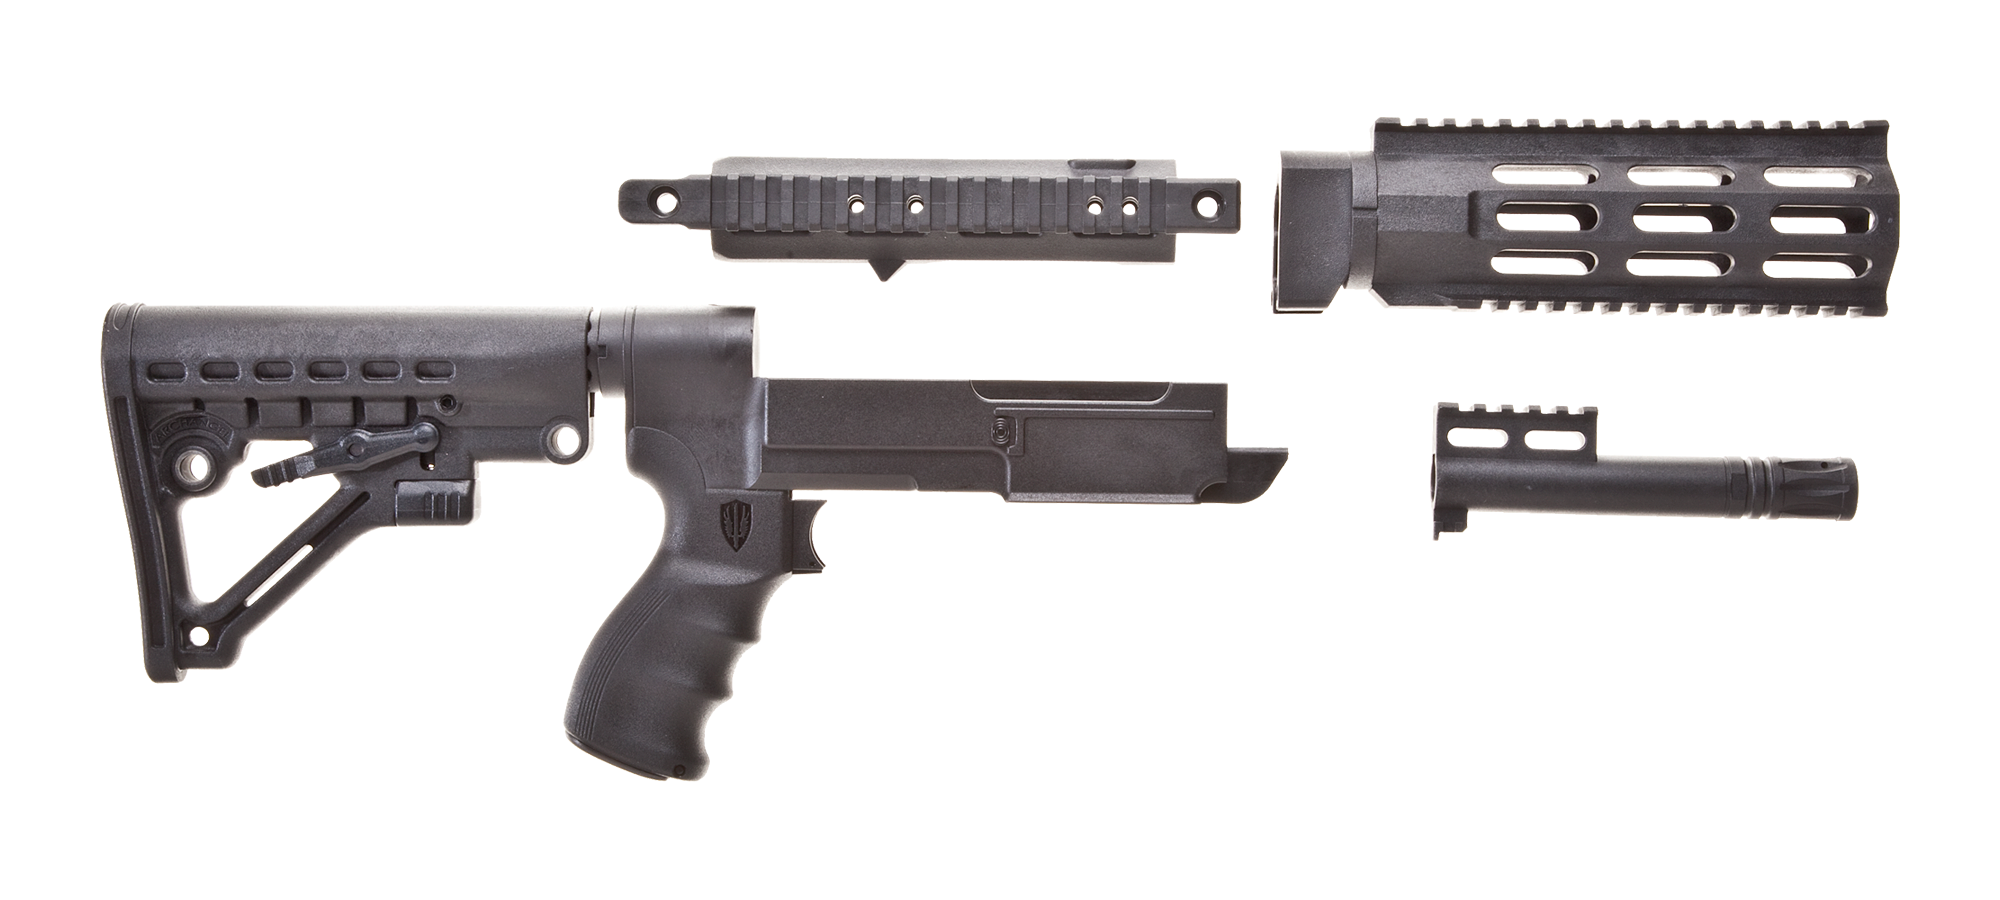 Archangel 556 AR-15 Style Conversion Stock for the Ruger 10/22 - Black